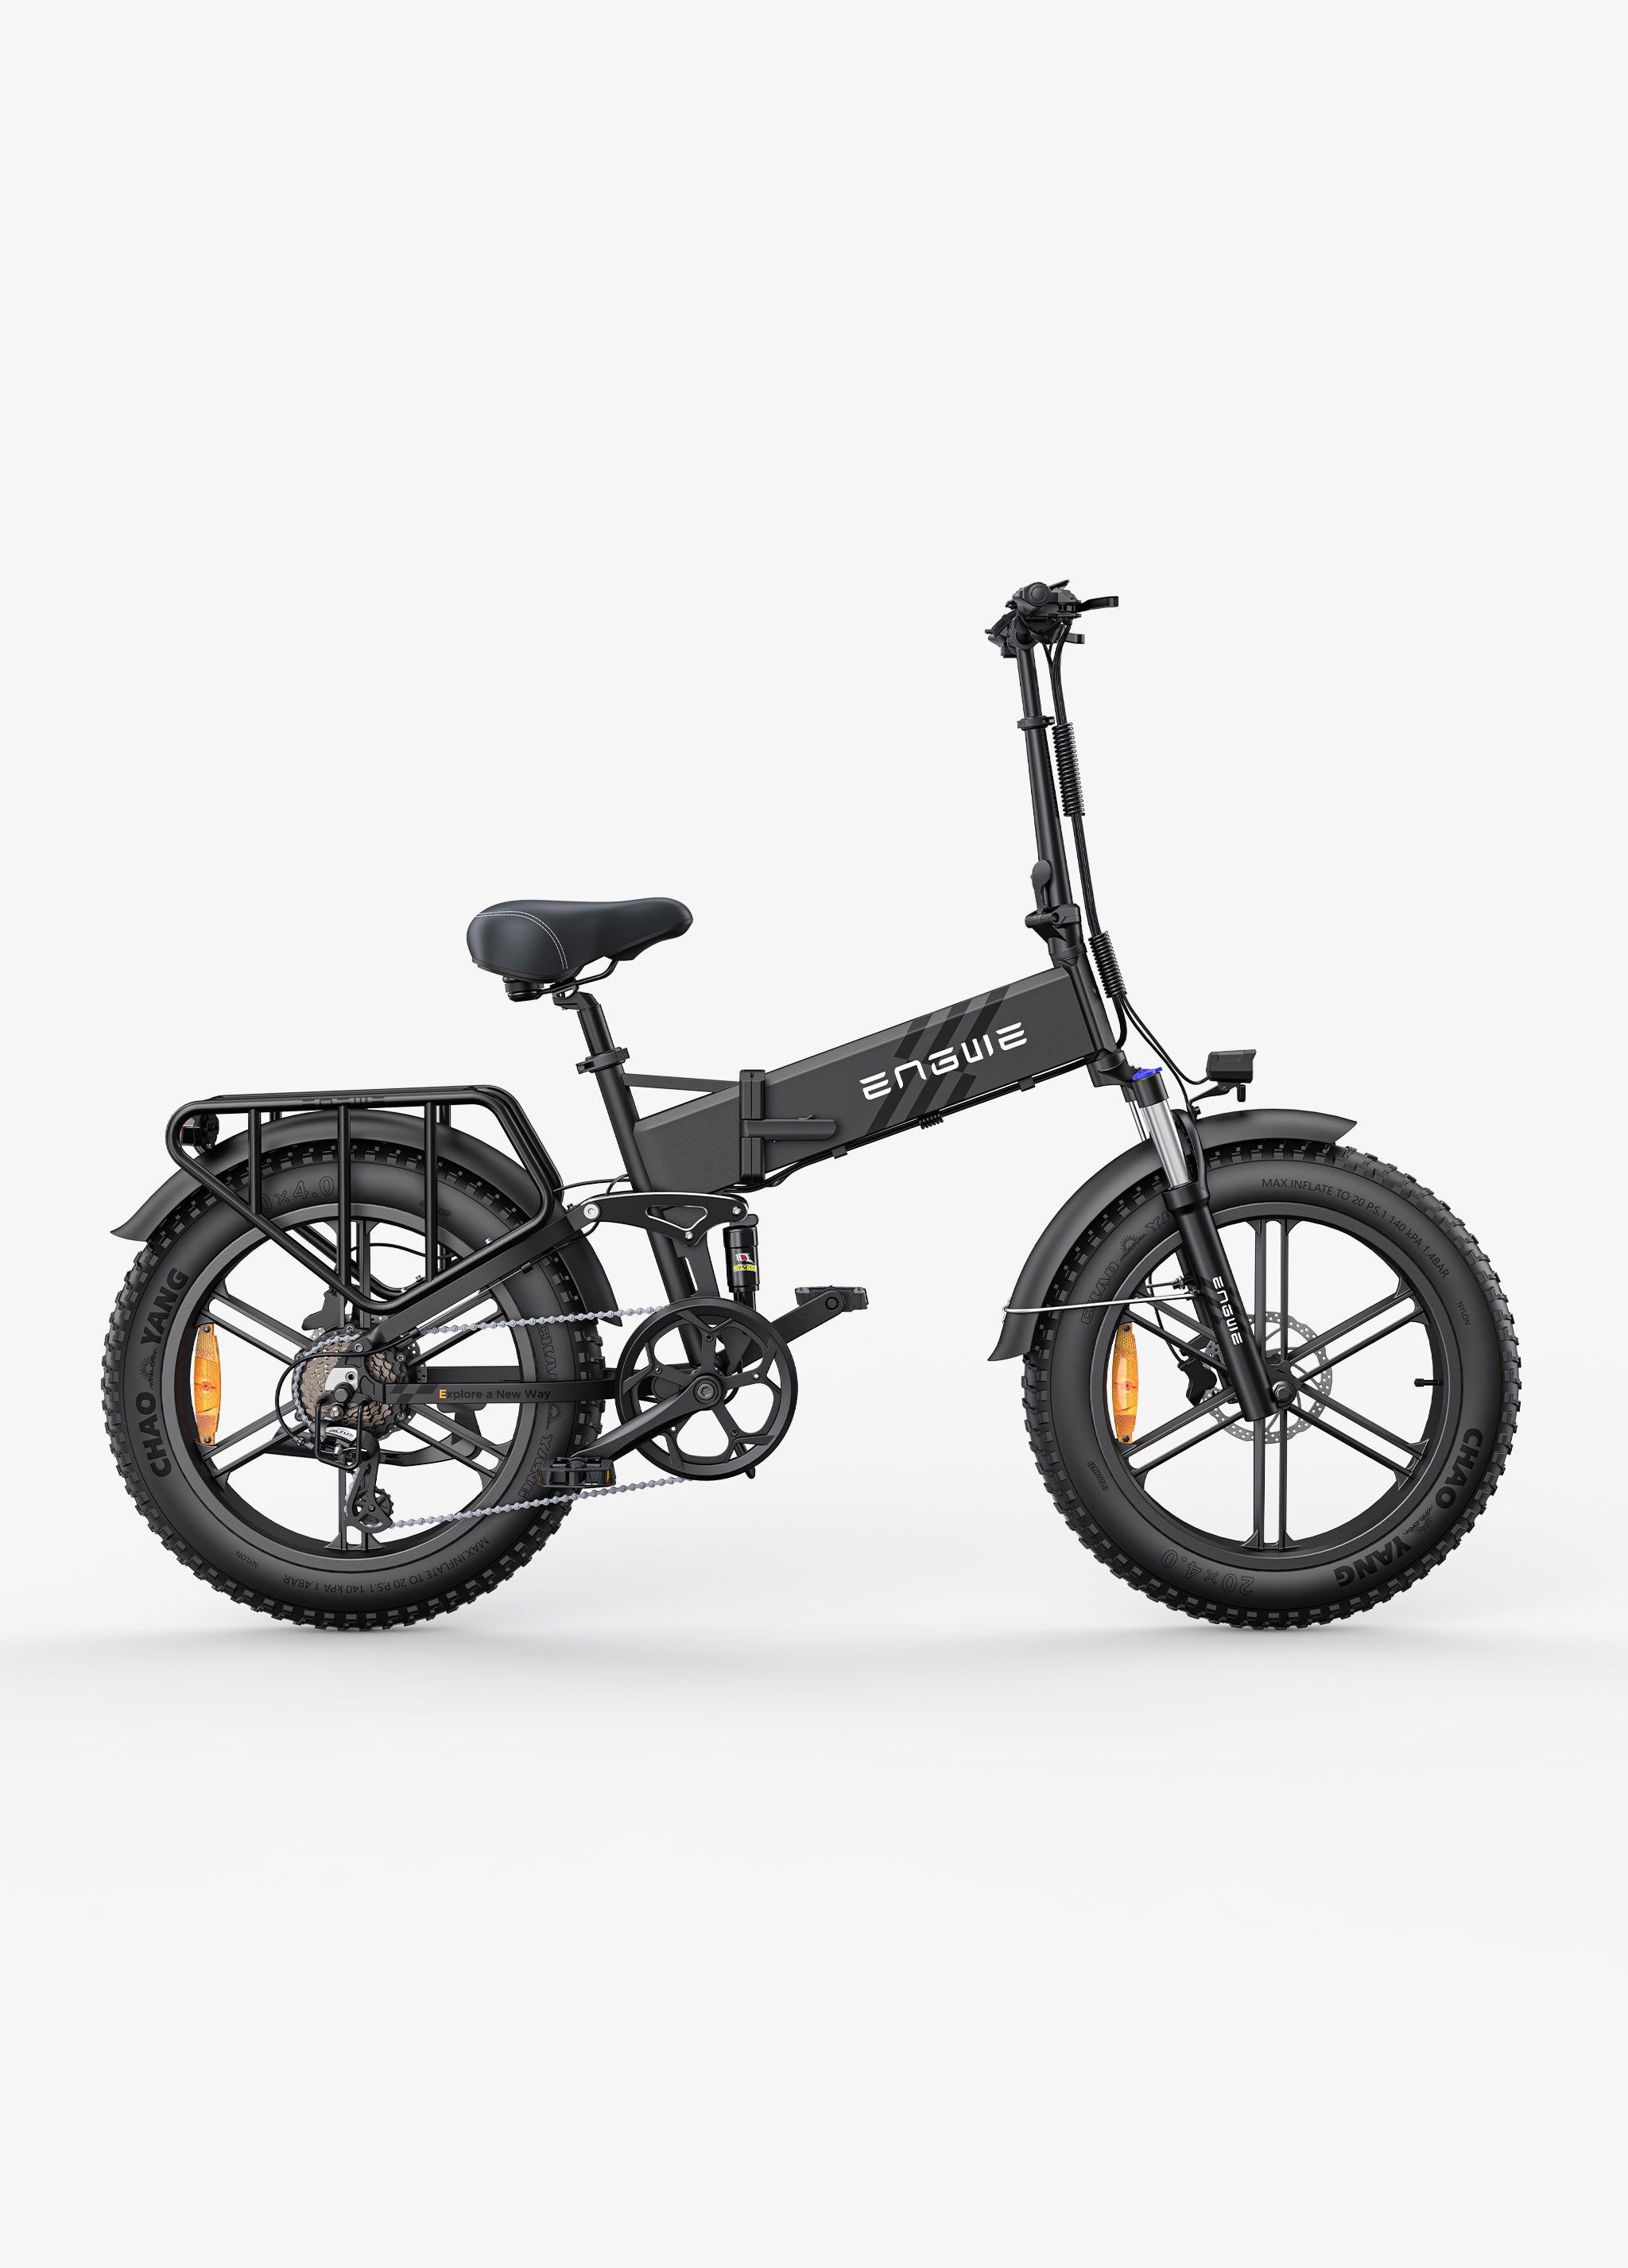 space black engwe engine pro 2.0 electric fat tire bike